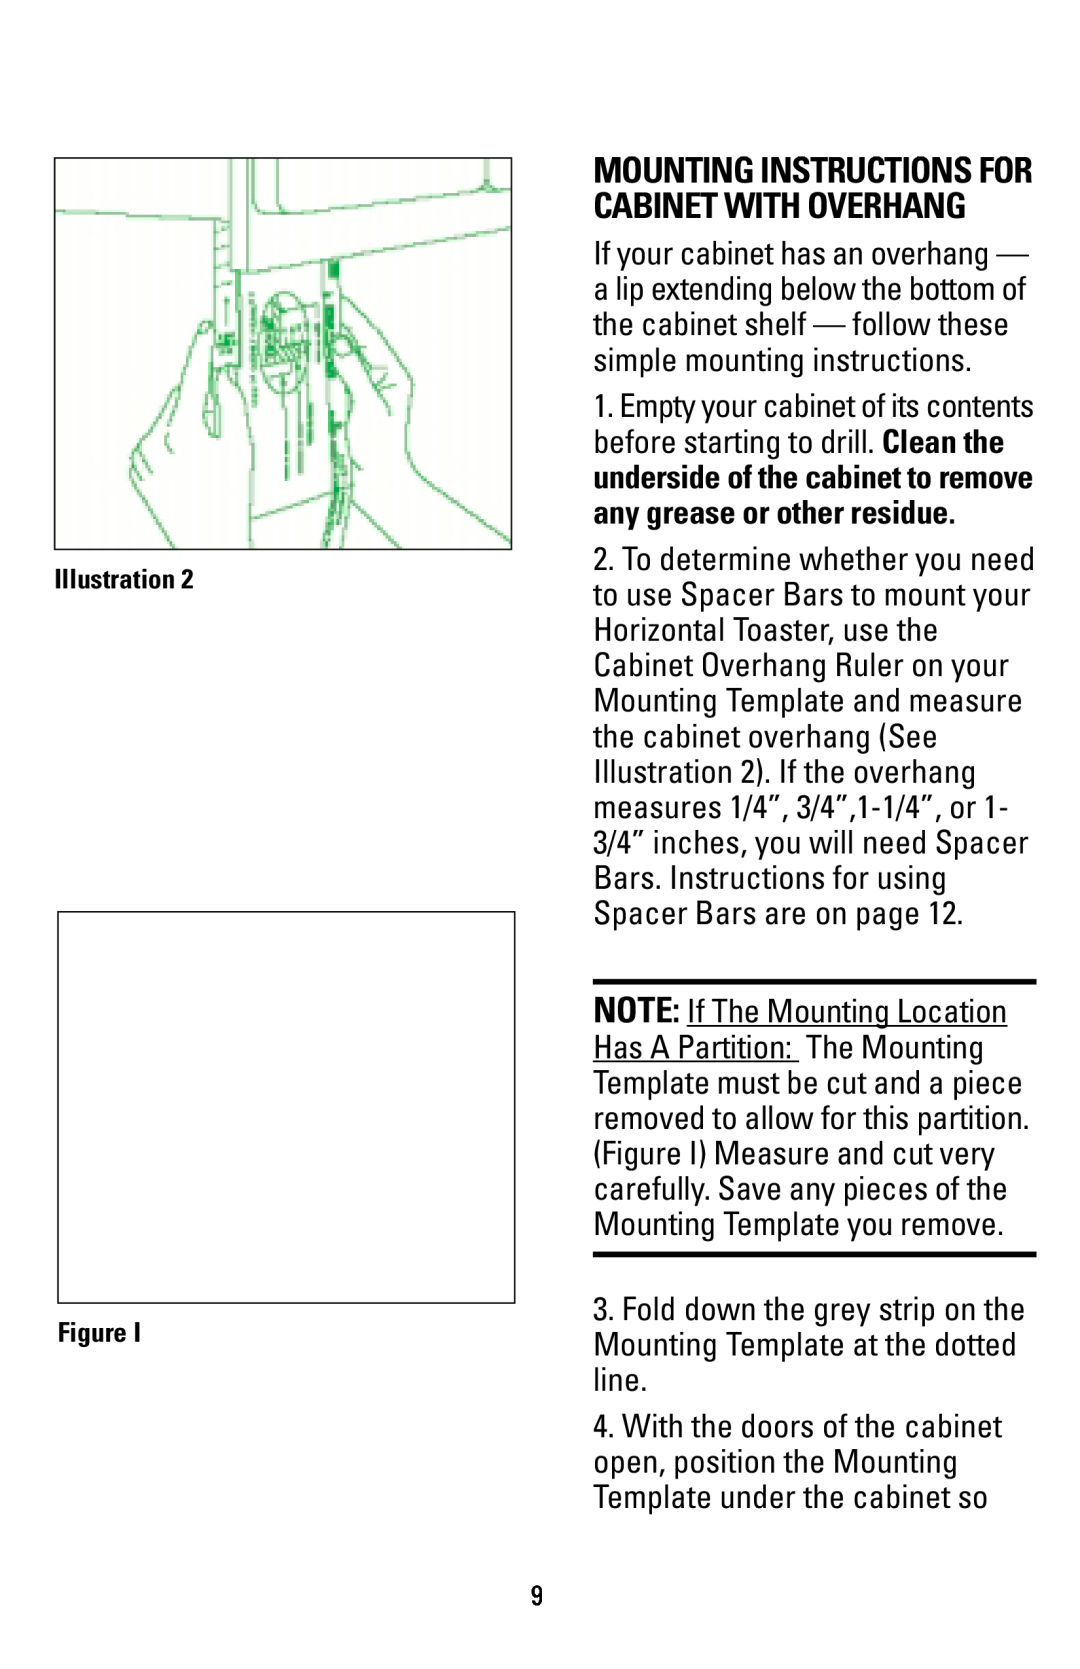 Black & Decker T1000 manual NOTE If The Mounting Location, Mounting Instructions For Cabinet With Overhang 